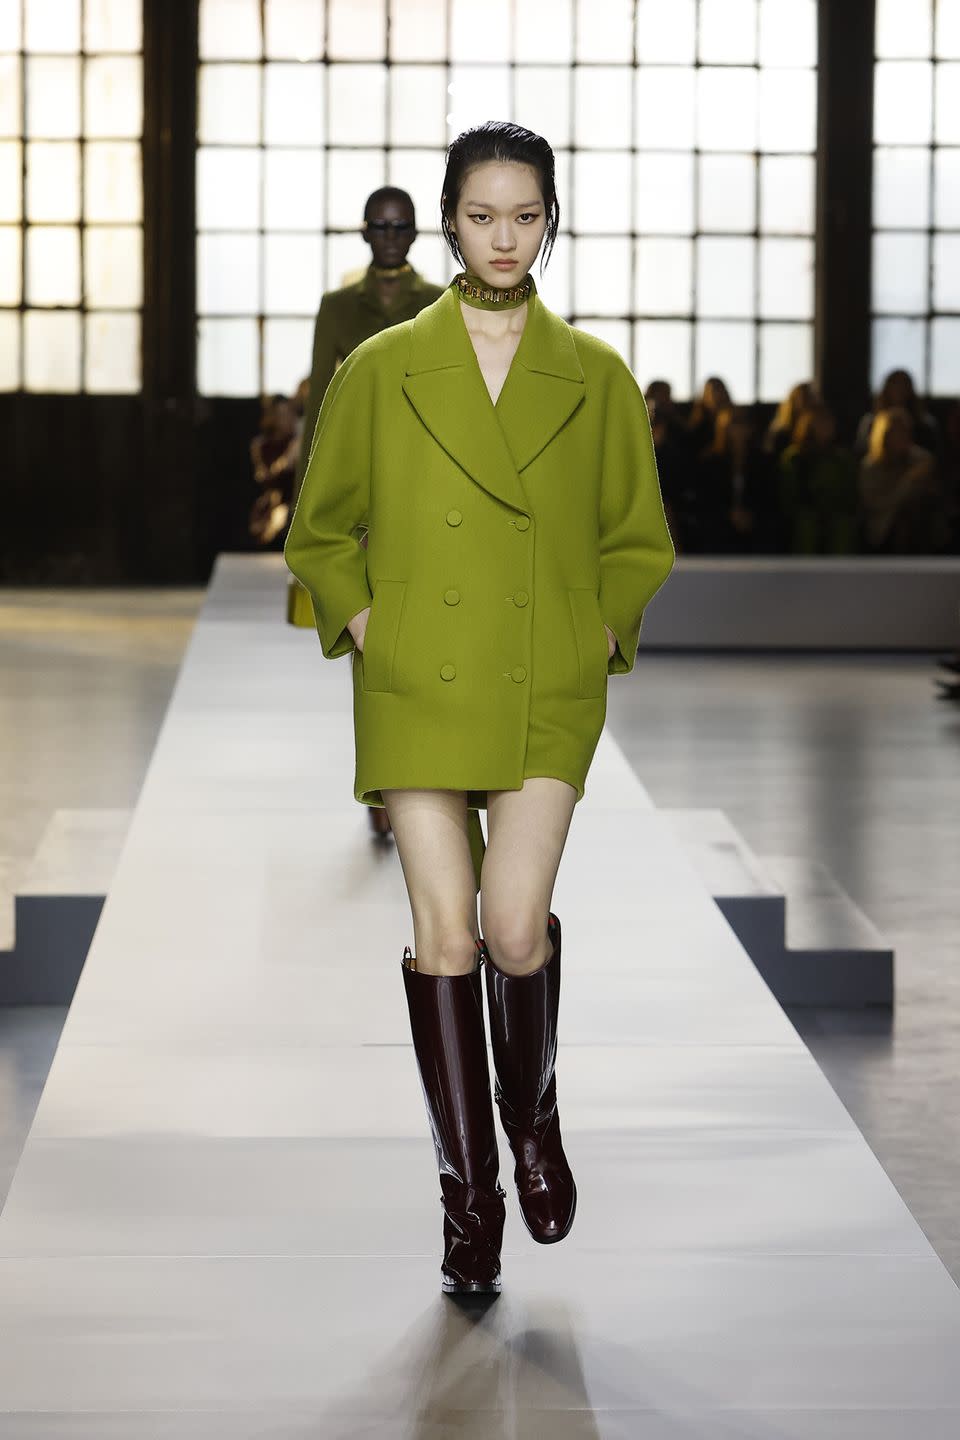 a person wearing a green coat and boots